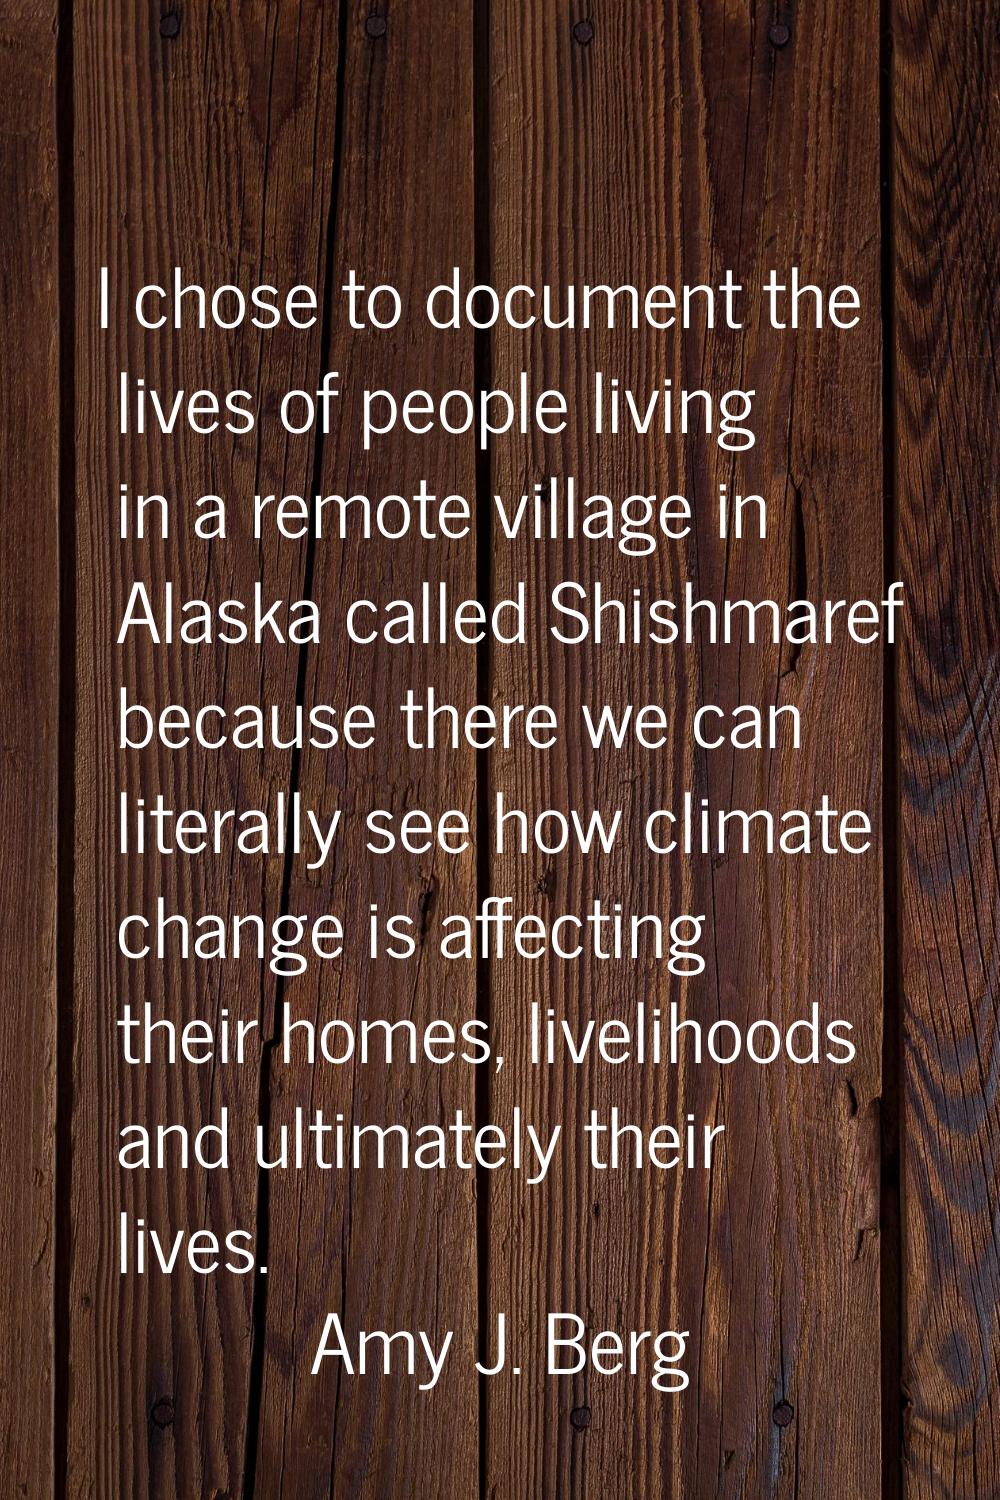 I chose to document the lives of people living in a remote village in Alaska called Shishmaref beca